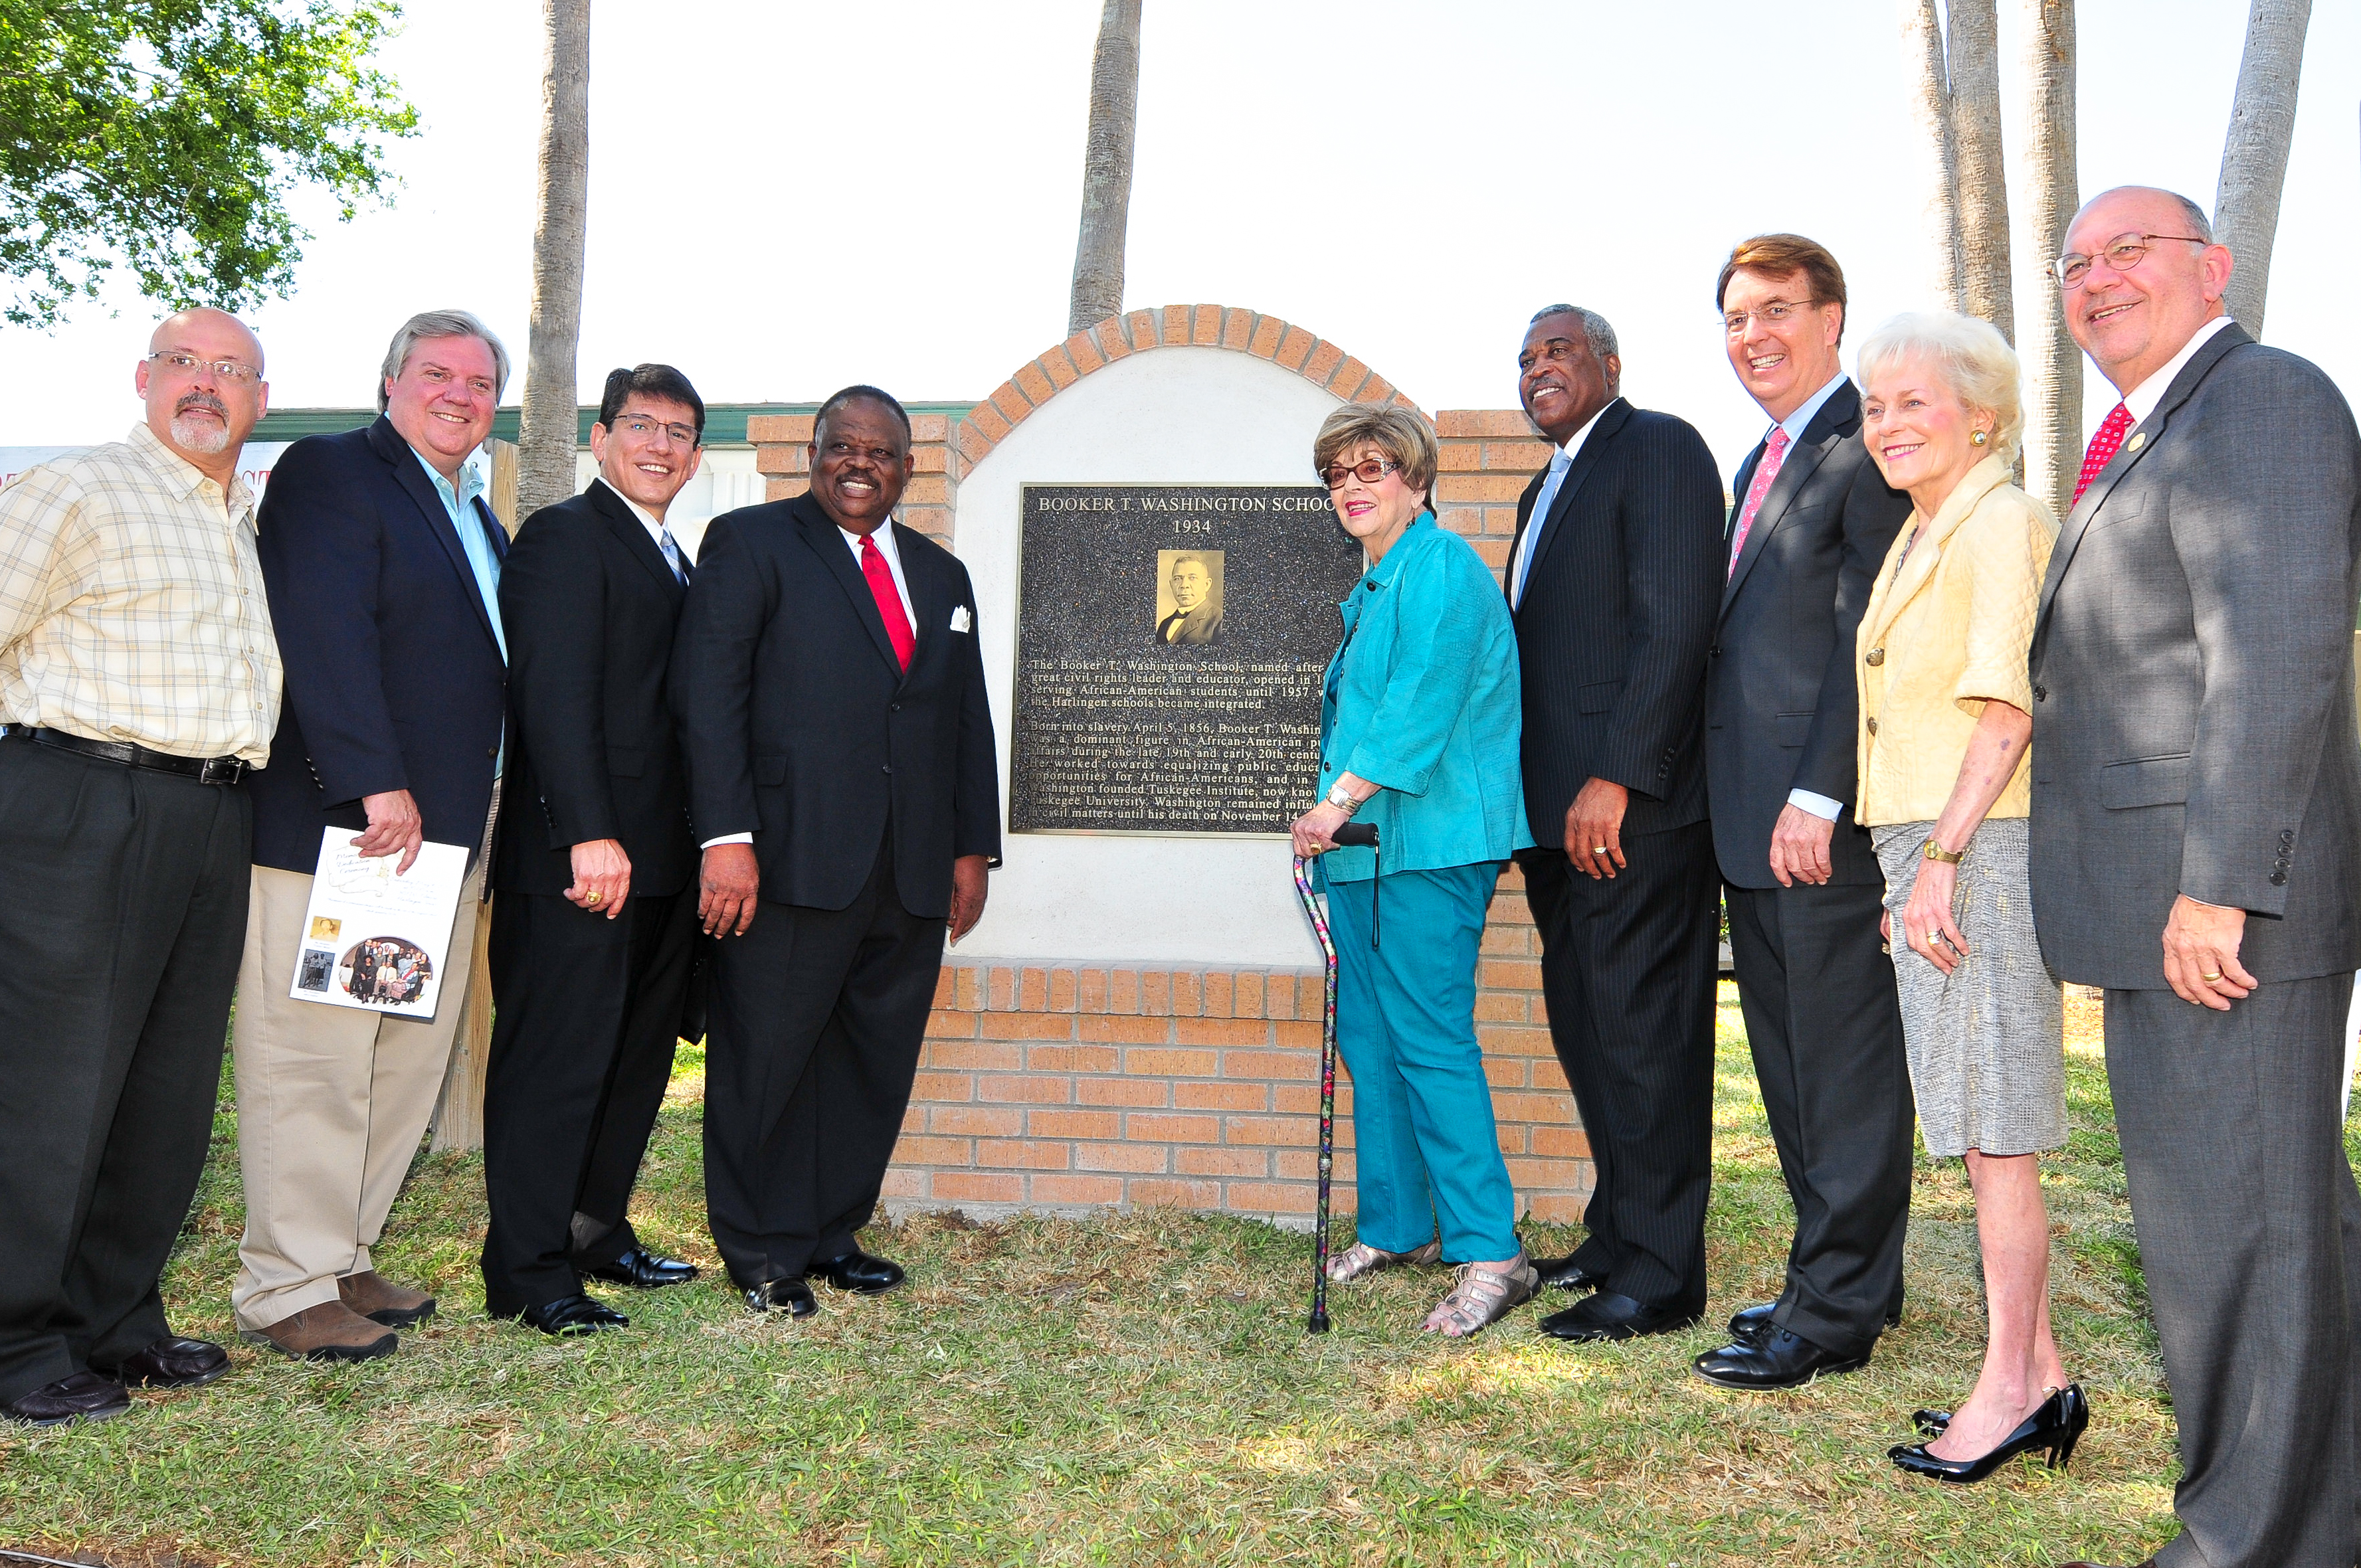 HCISD honors former campus during plaque unveiling ceremony